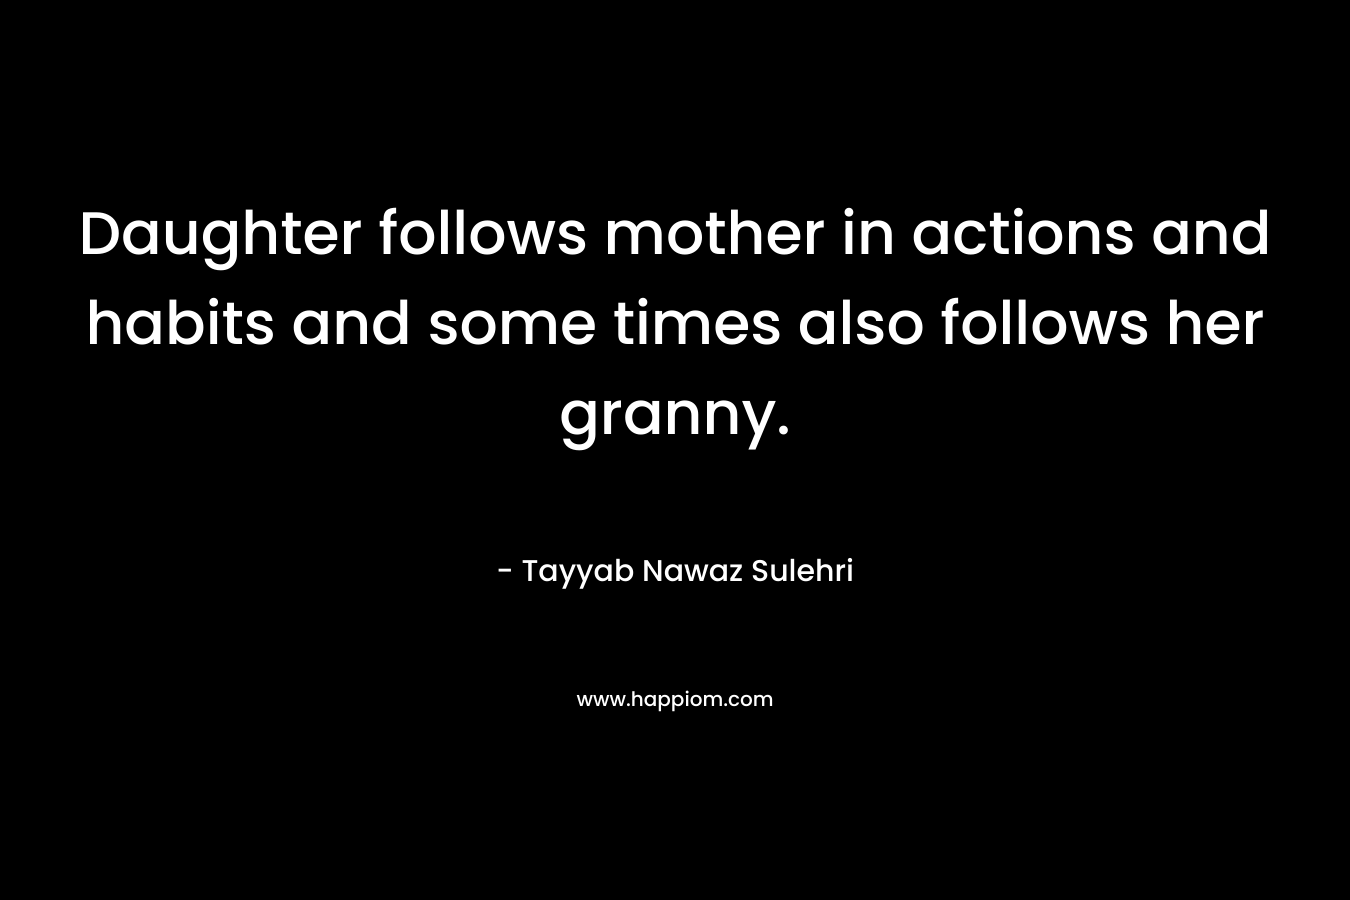 Daughter follows mother in actions and habits and some times also follows her granny.